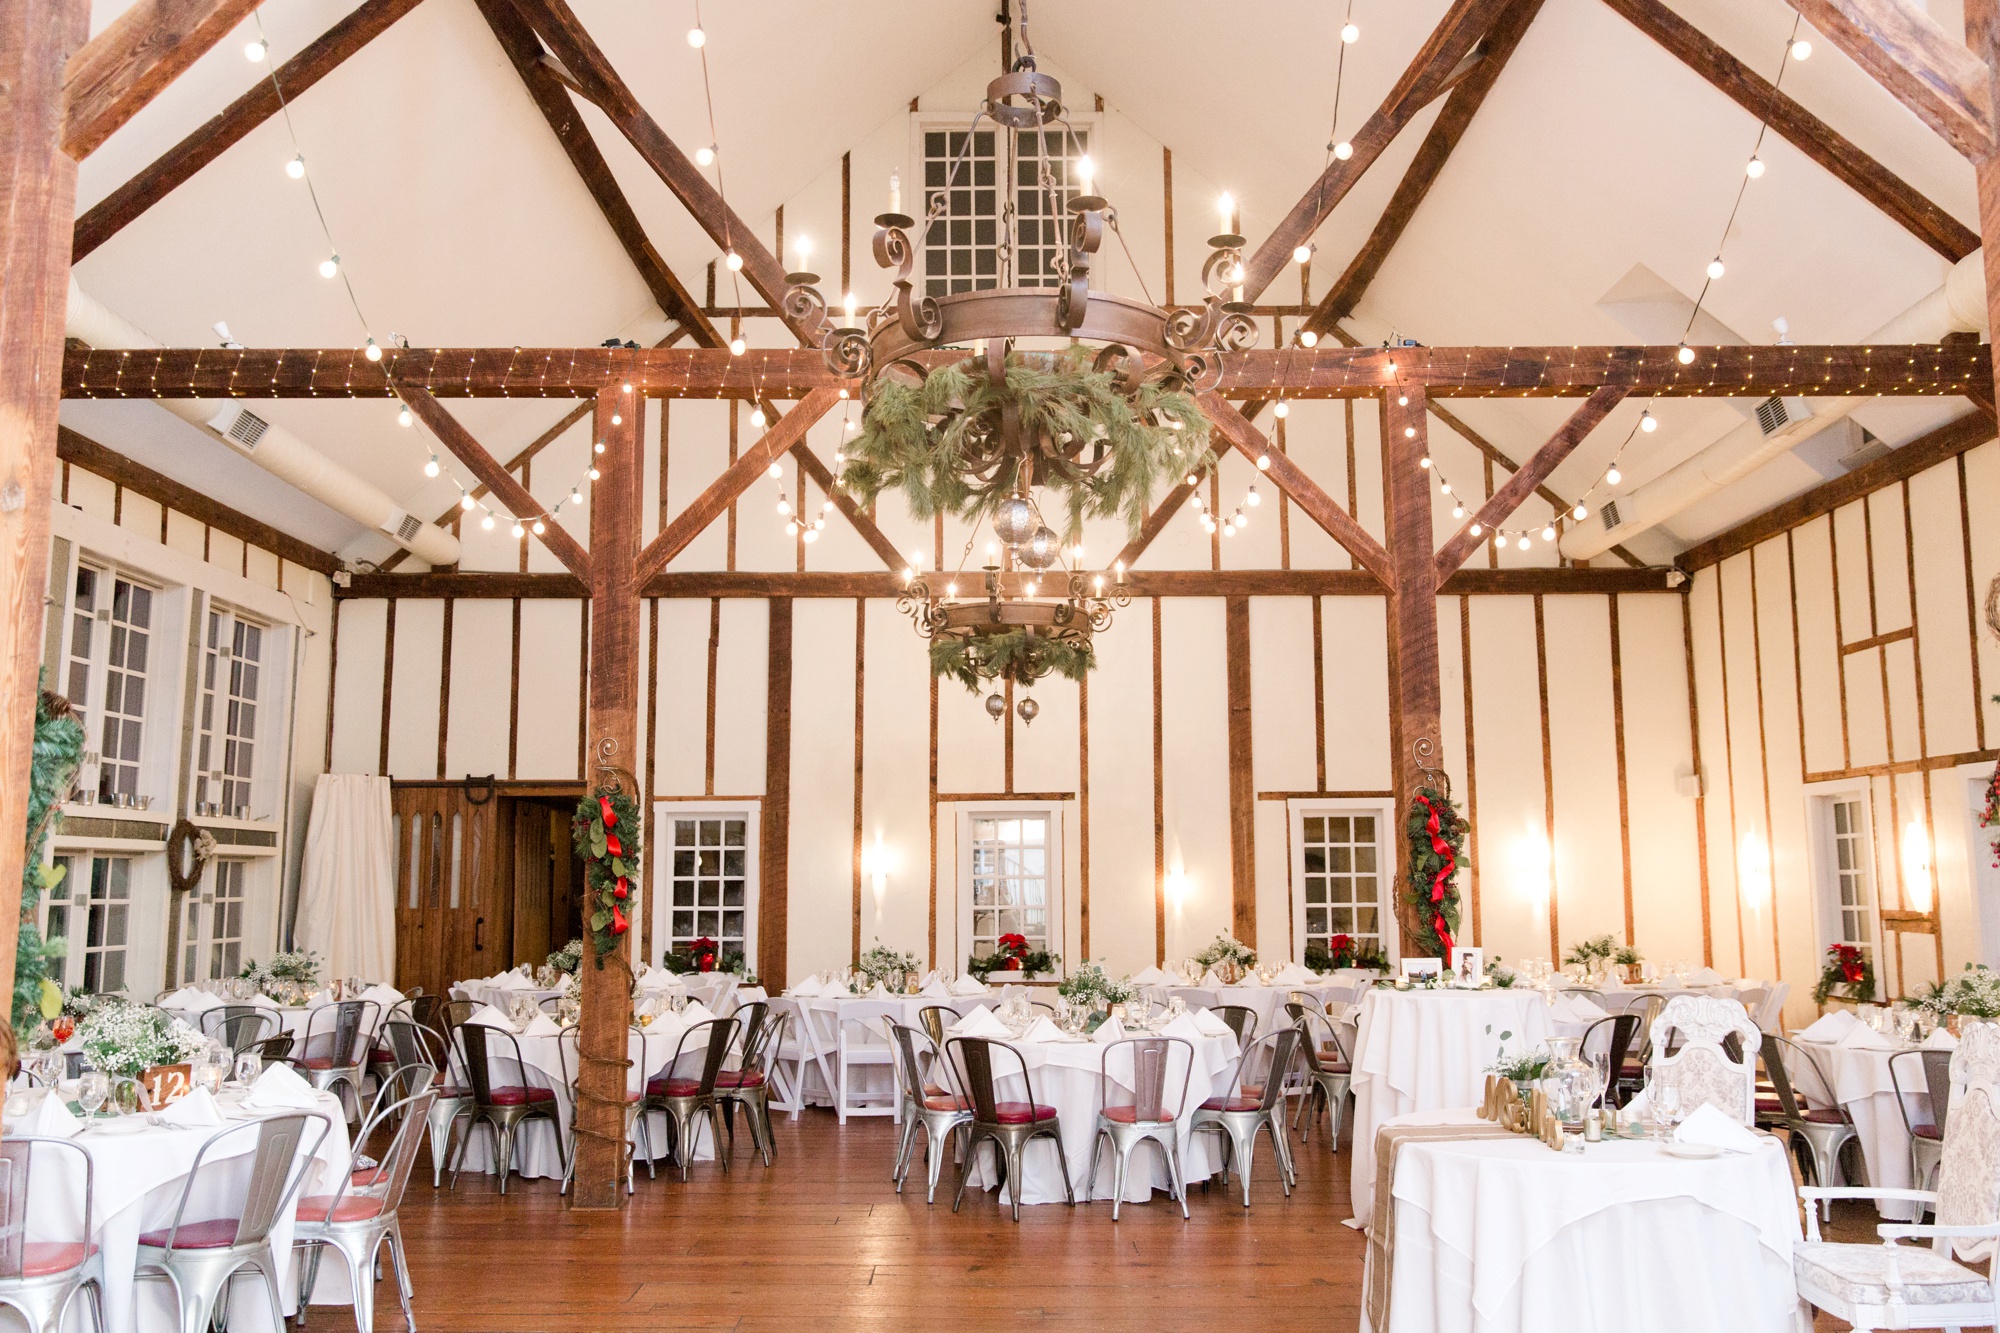 Gables at Chadds Ford Winter Wedding Reception